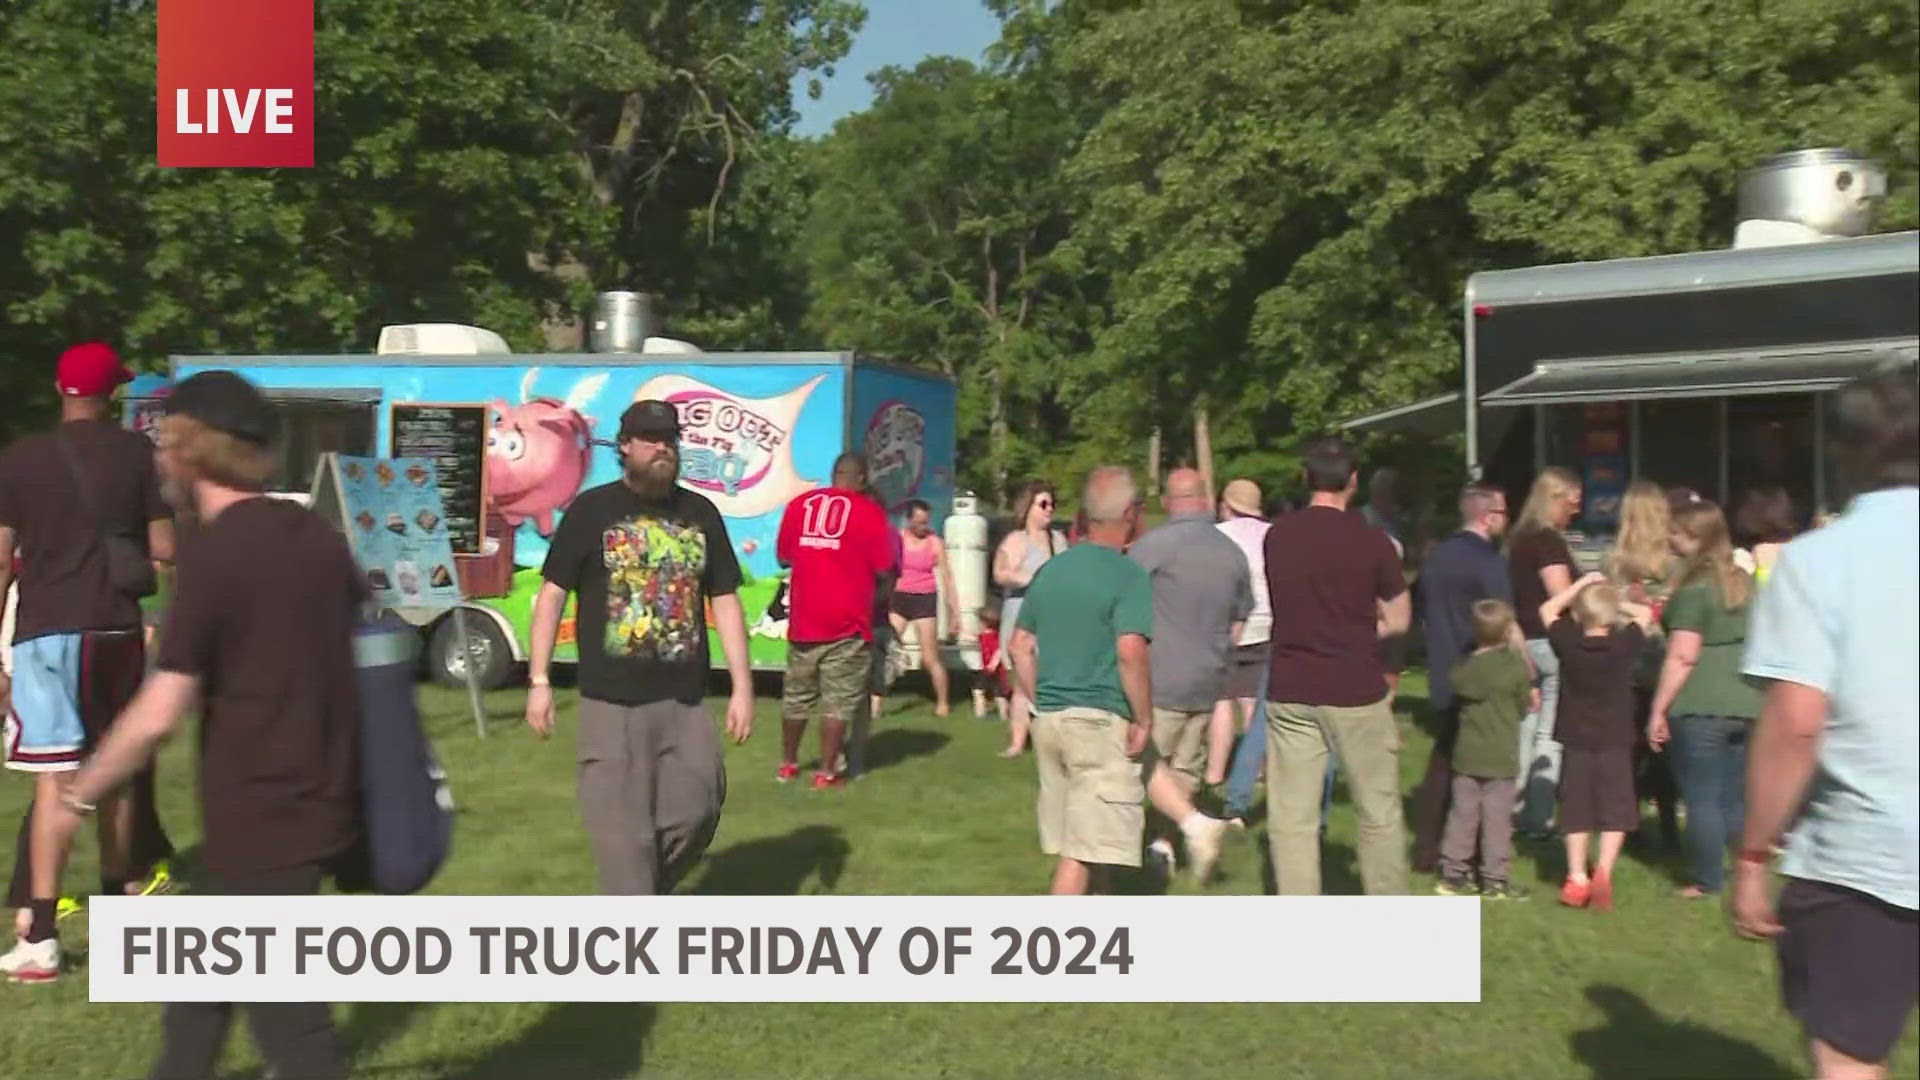 The event is a summer favorite for Grand Rapids residents and is taking place at Riverside Park.